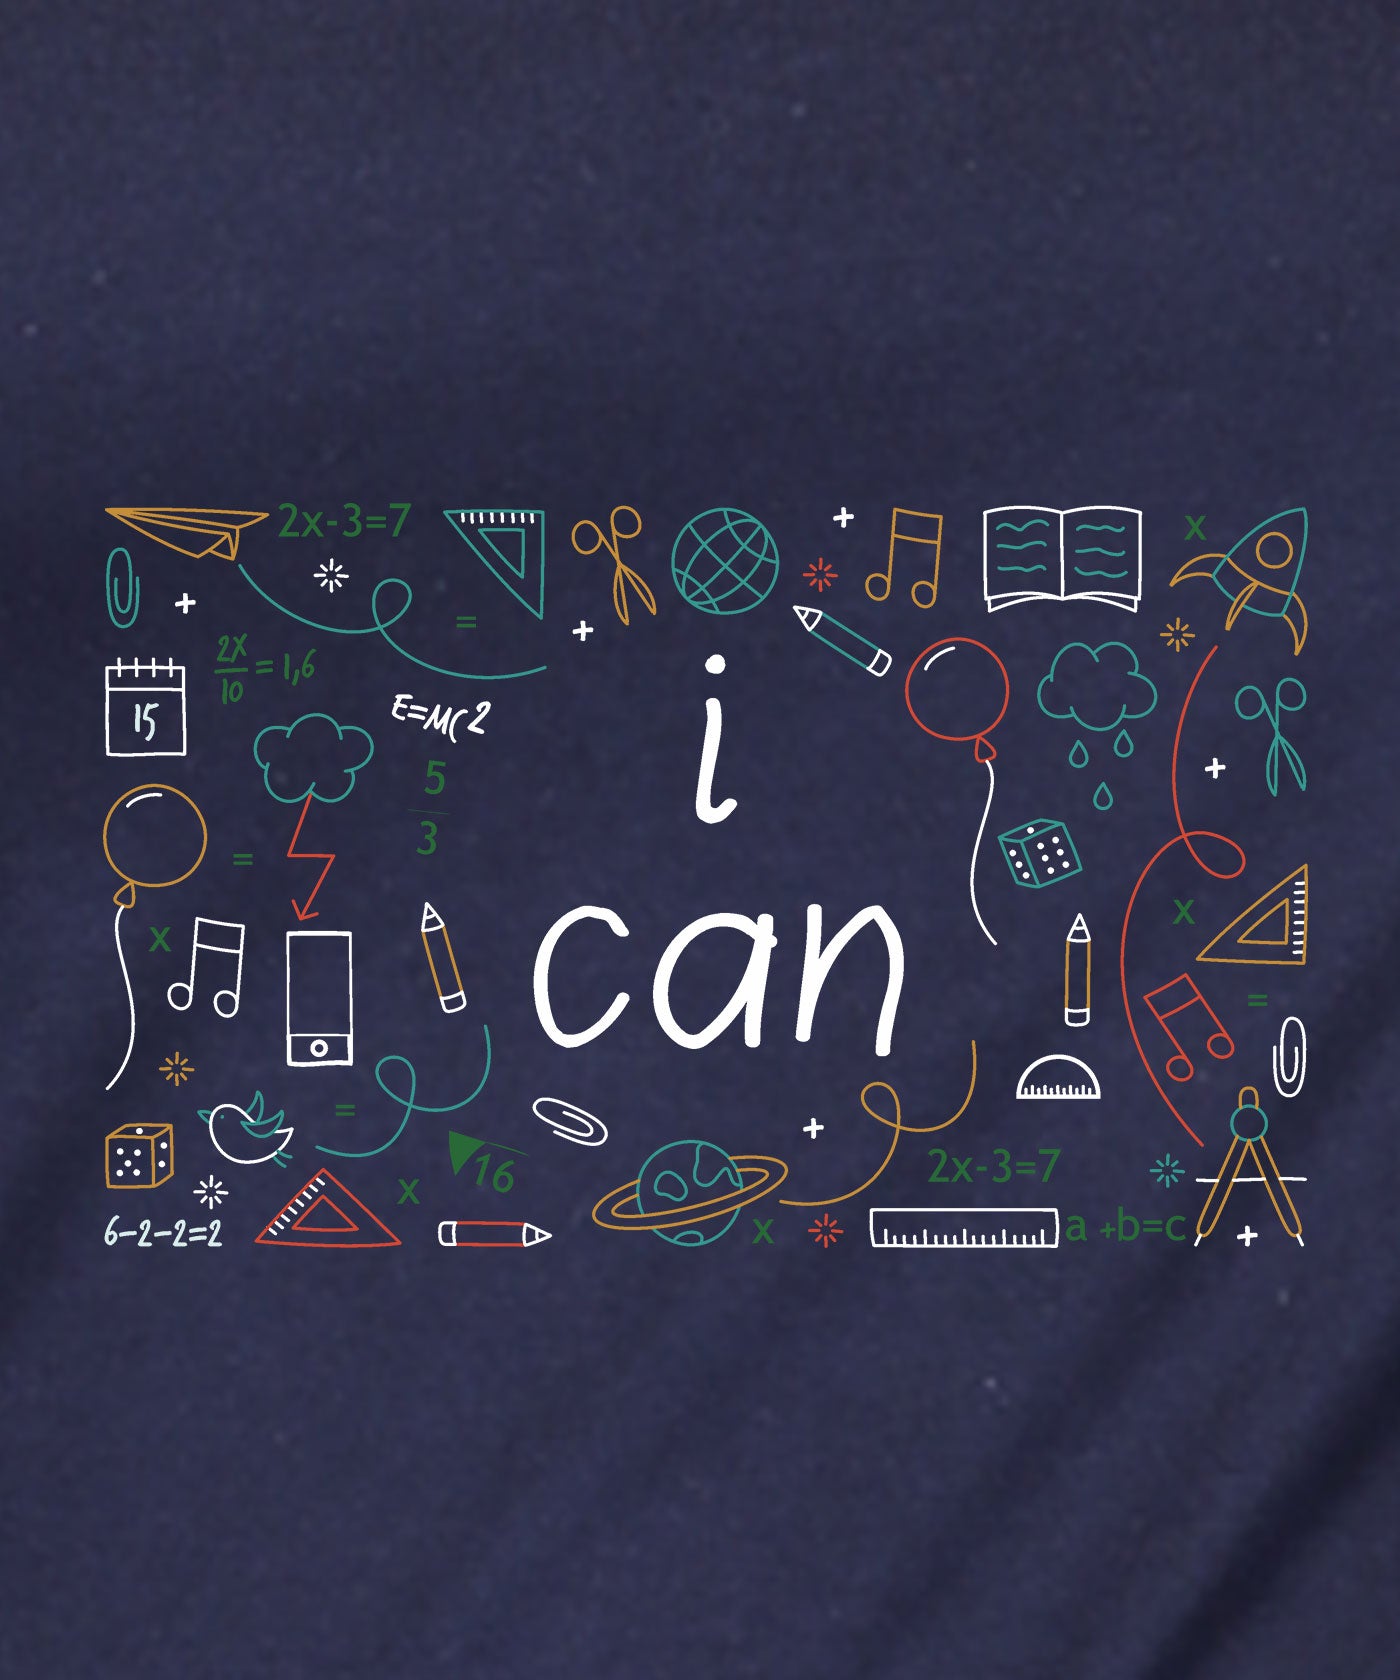 I Can - Premium Round Neck Cotton Tees for Women - Navy Blue